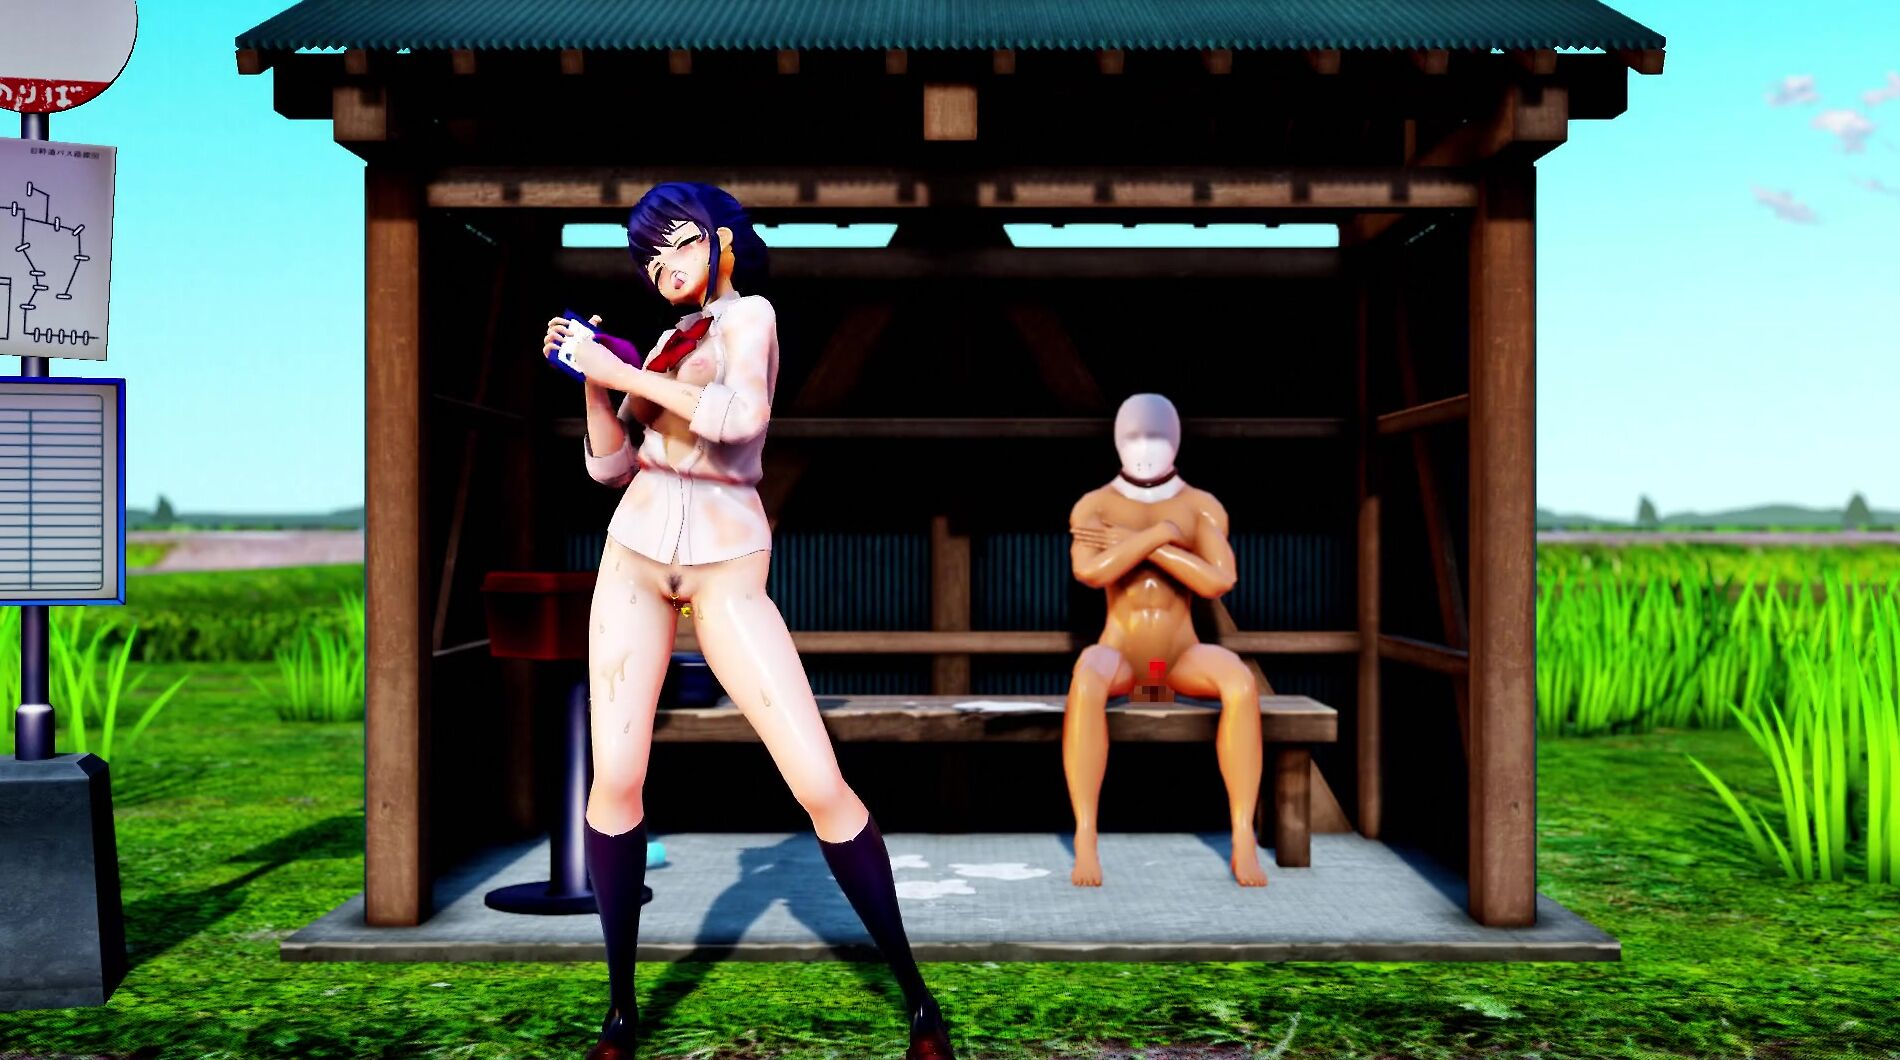 Mmd R18 Sex Danced at a Bus Stop into the Countryside